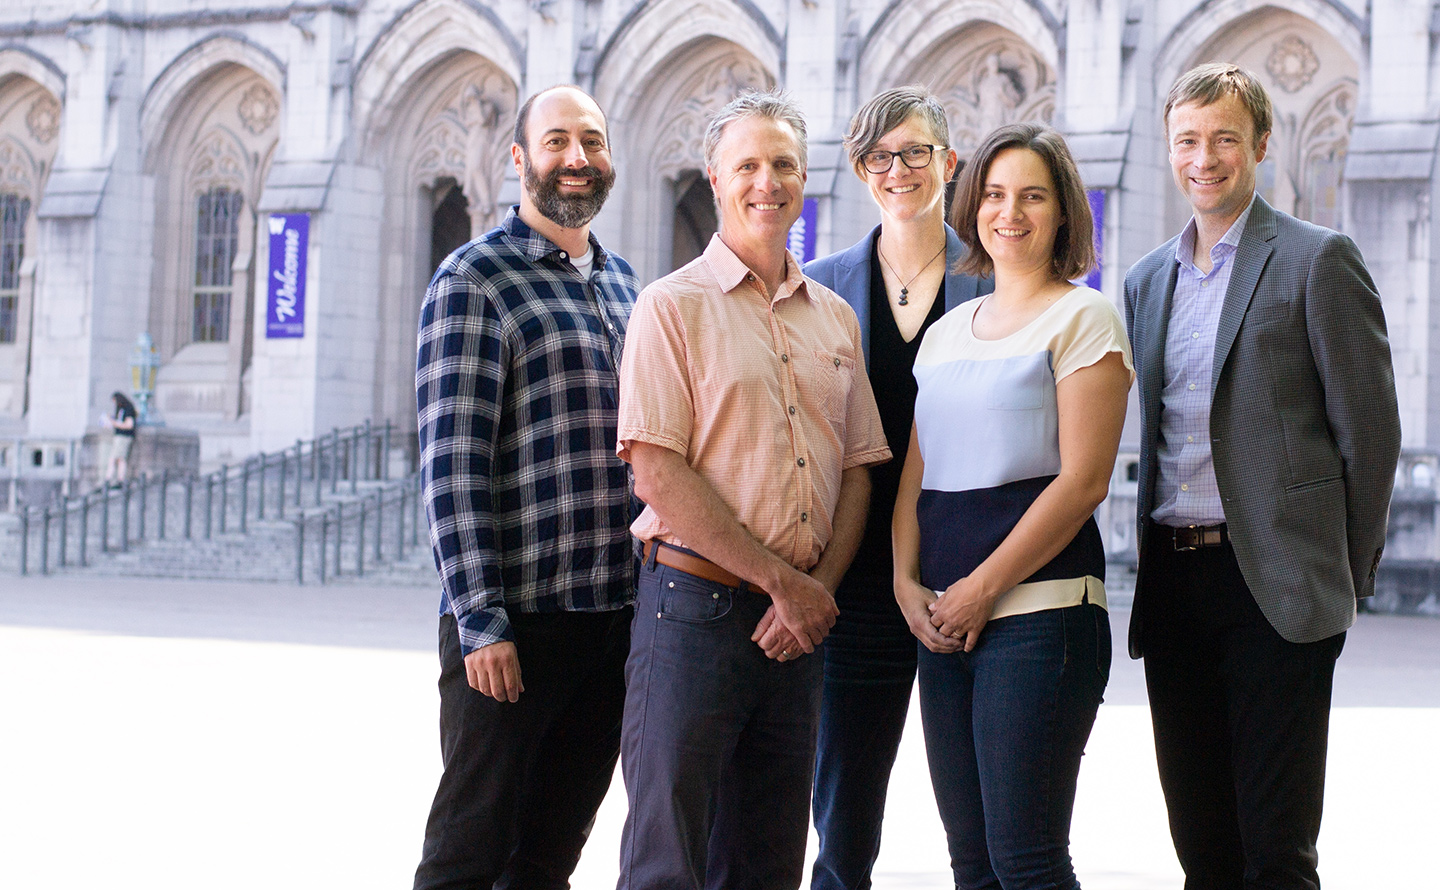 Researchers (from left) Ryan Calo, Chris Coward, Kate Starbird, Emma Spiro and Jevin West